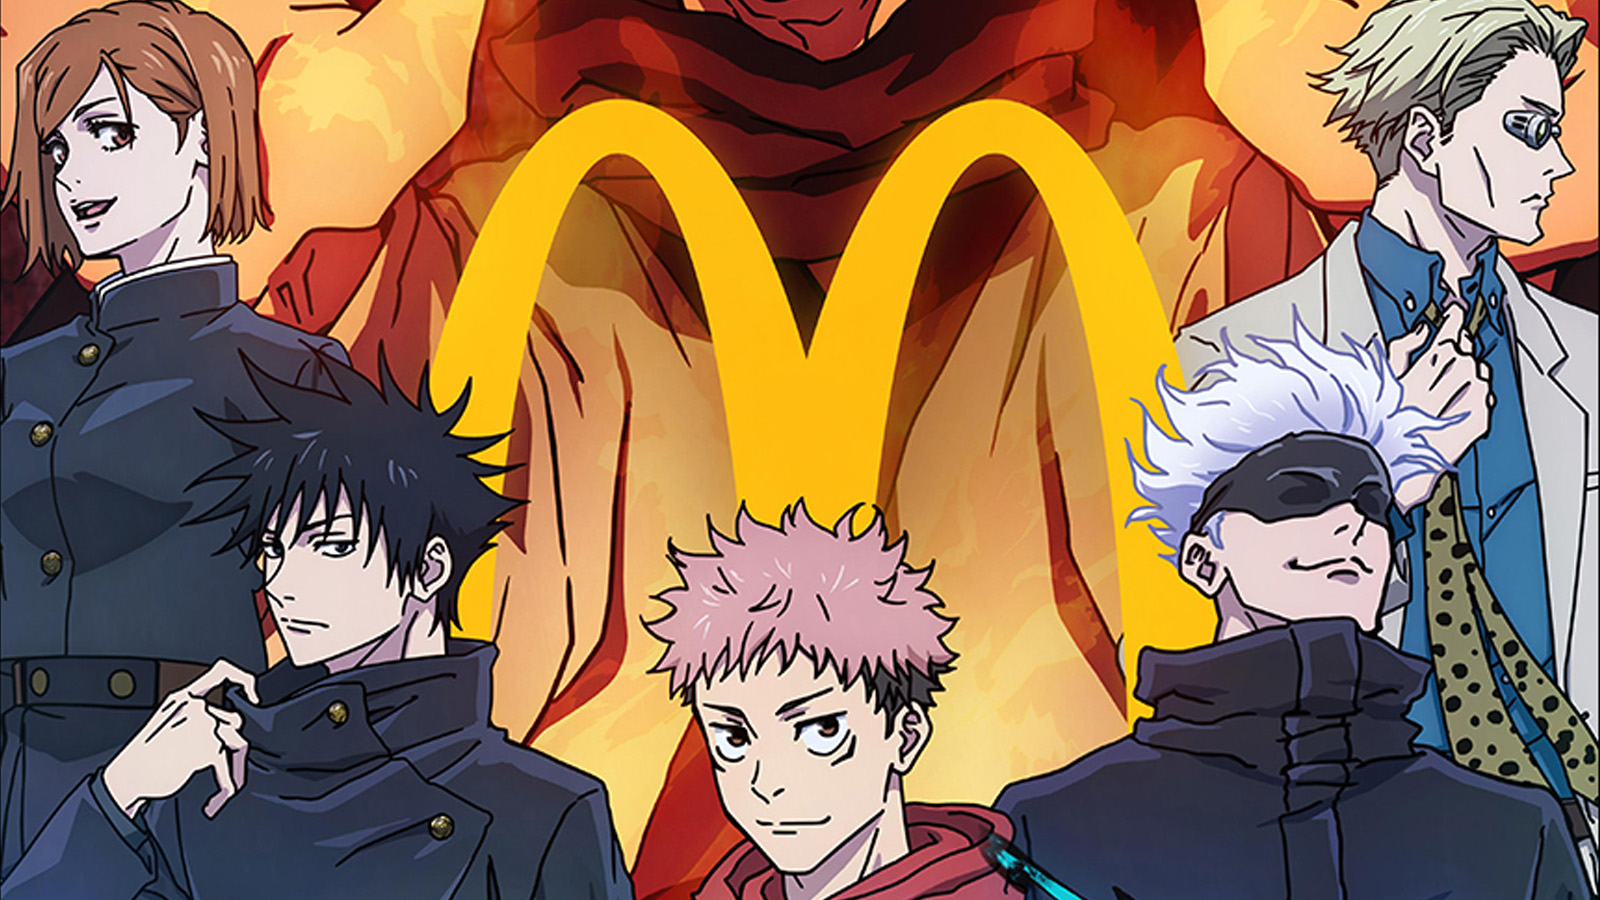 The main Jujutsu Kaisen characters stand in front of a McDonald's logo